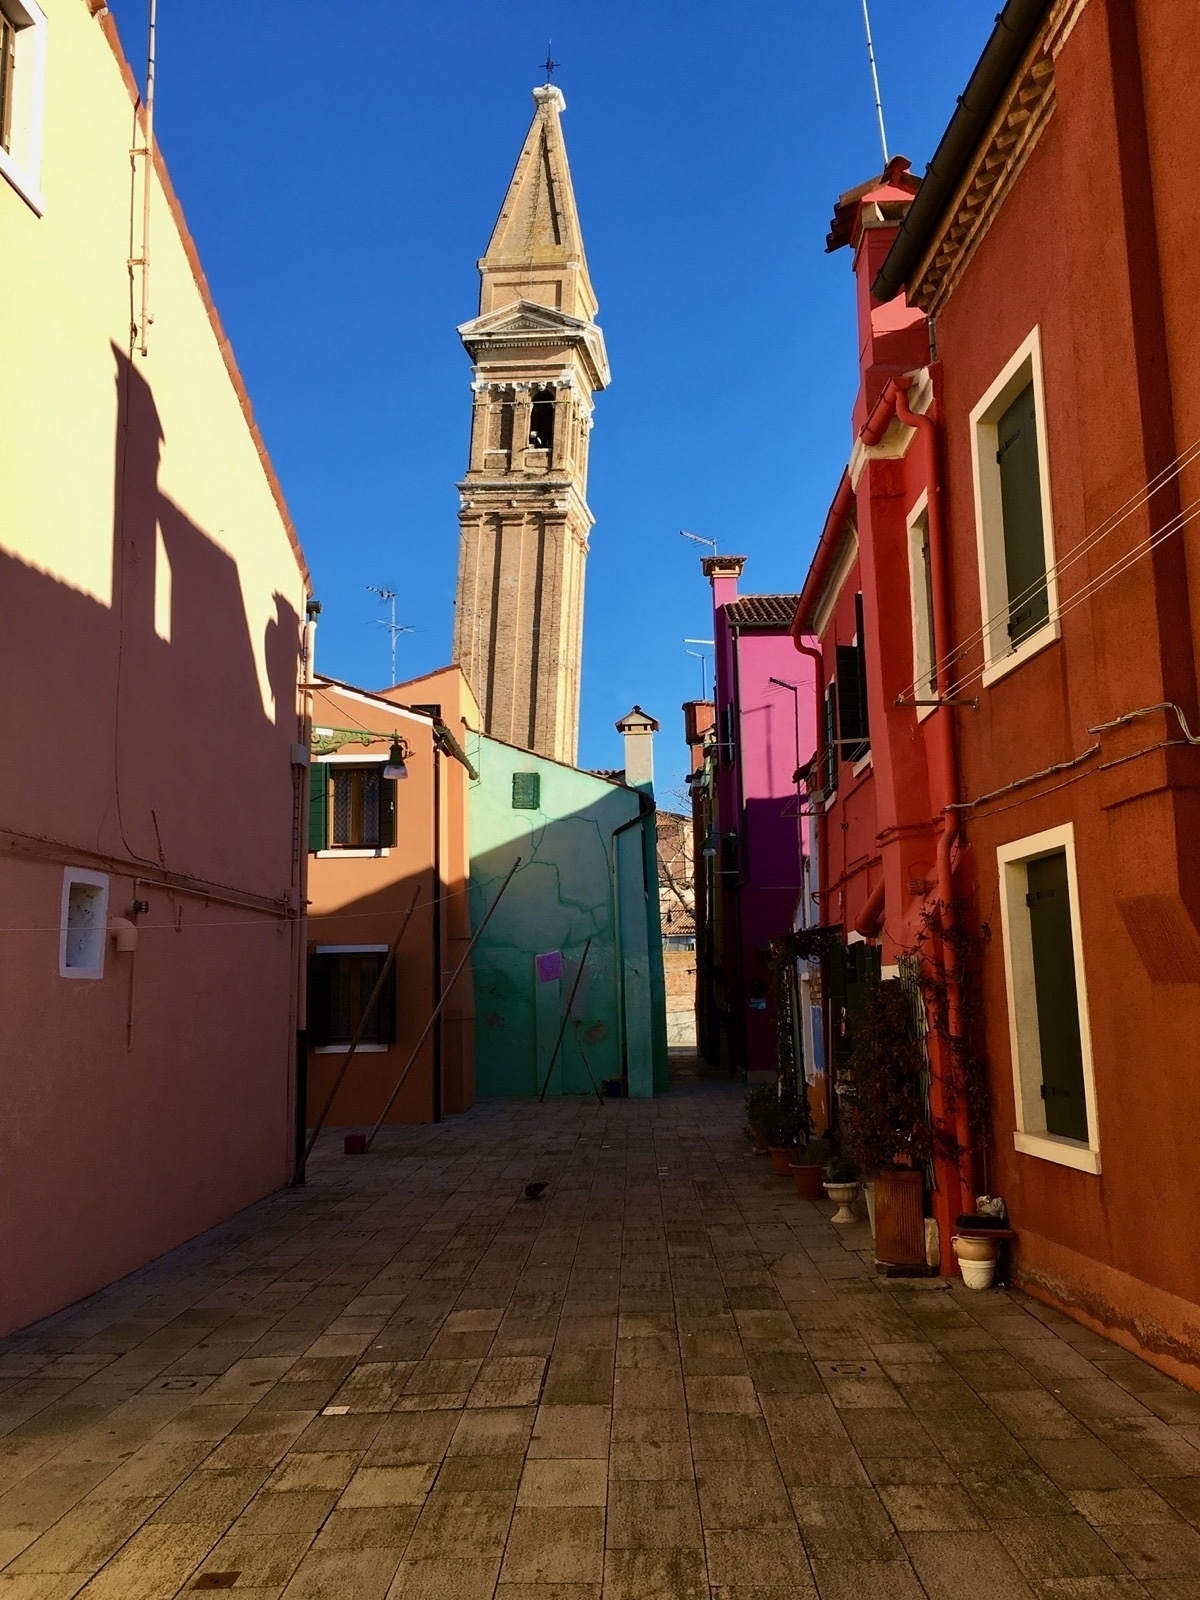 Coloured houses and bell tower in Burano, Venice